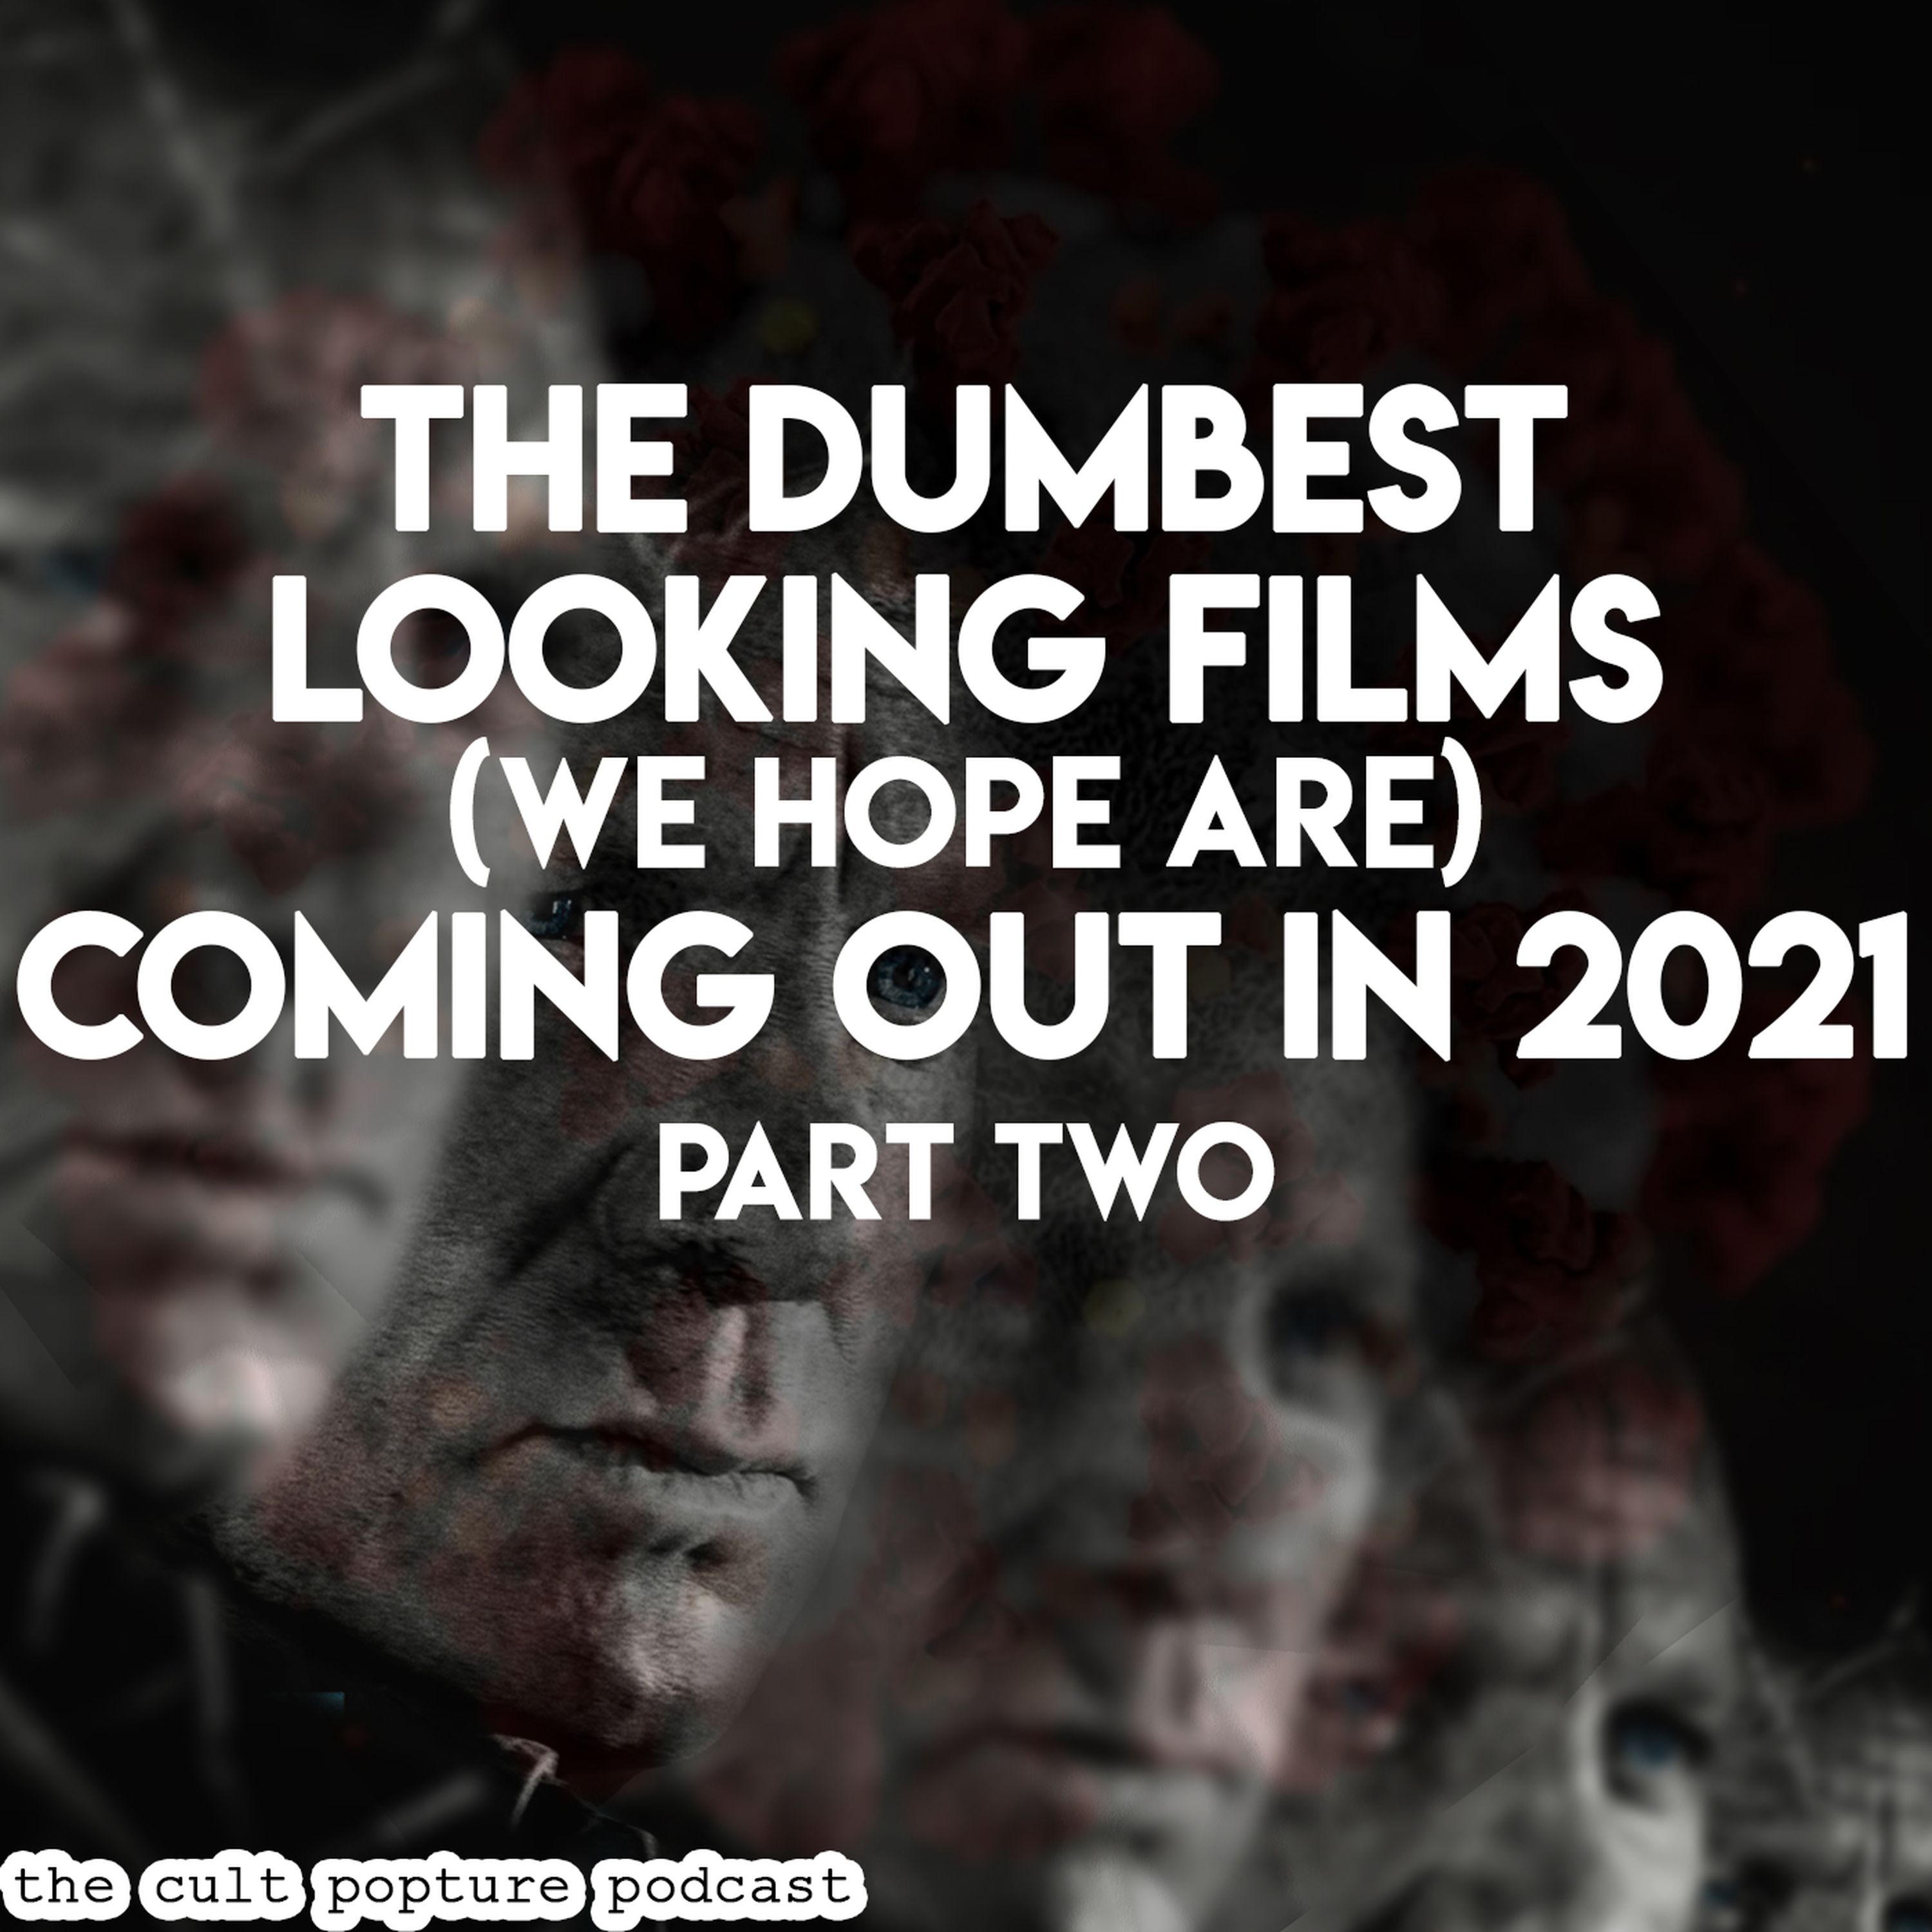 The Dumbest Looking Films (We Hope Are) Coming Out in 2021 (Part Two) | The Cult Popture Podcast